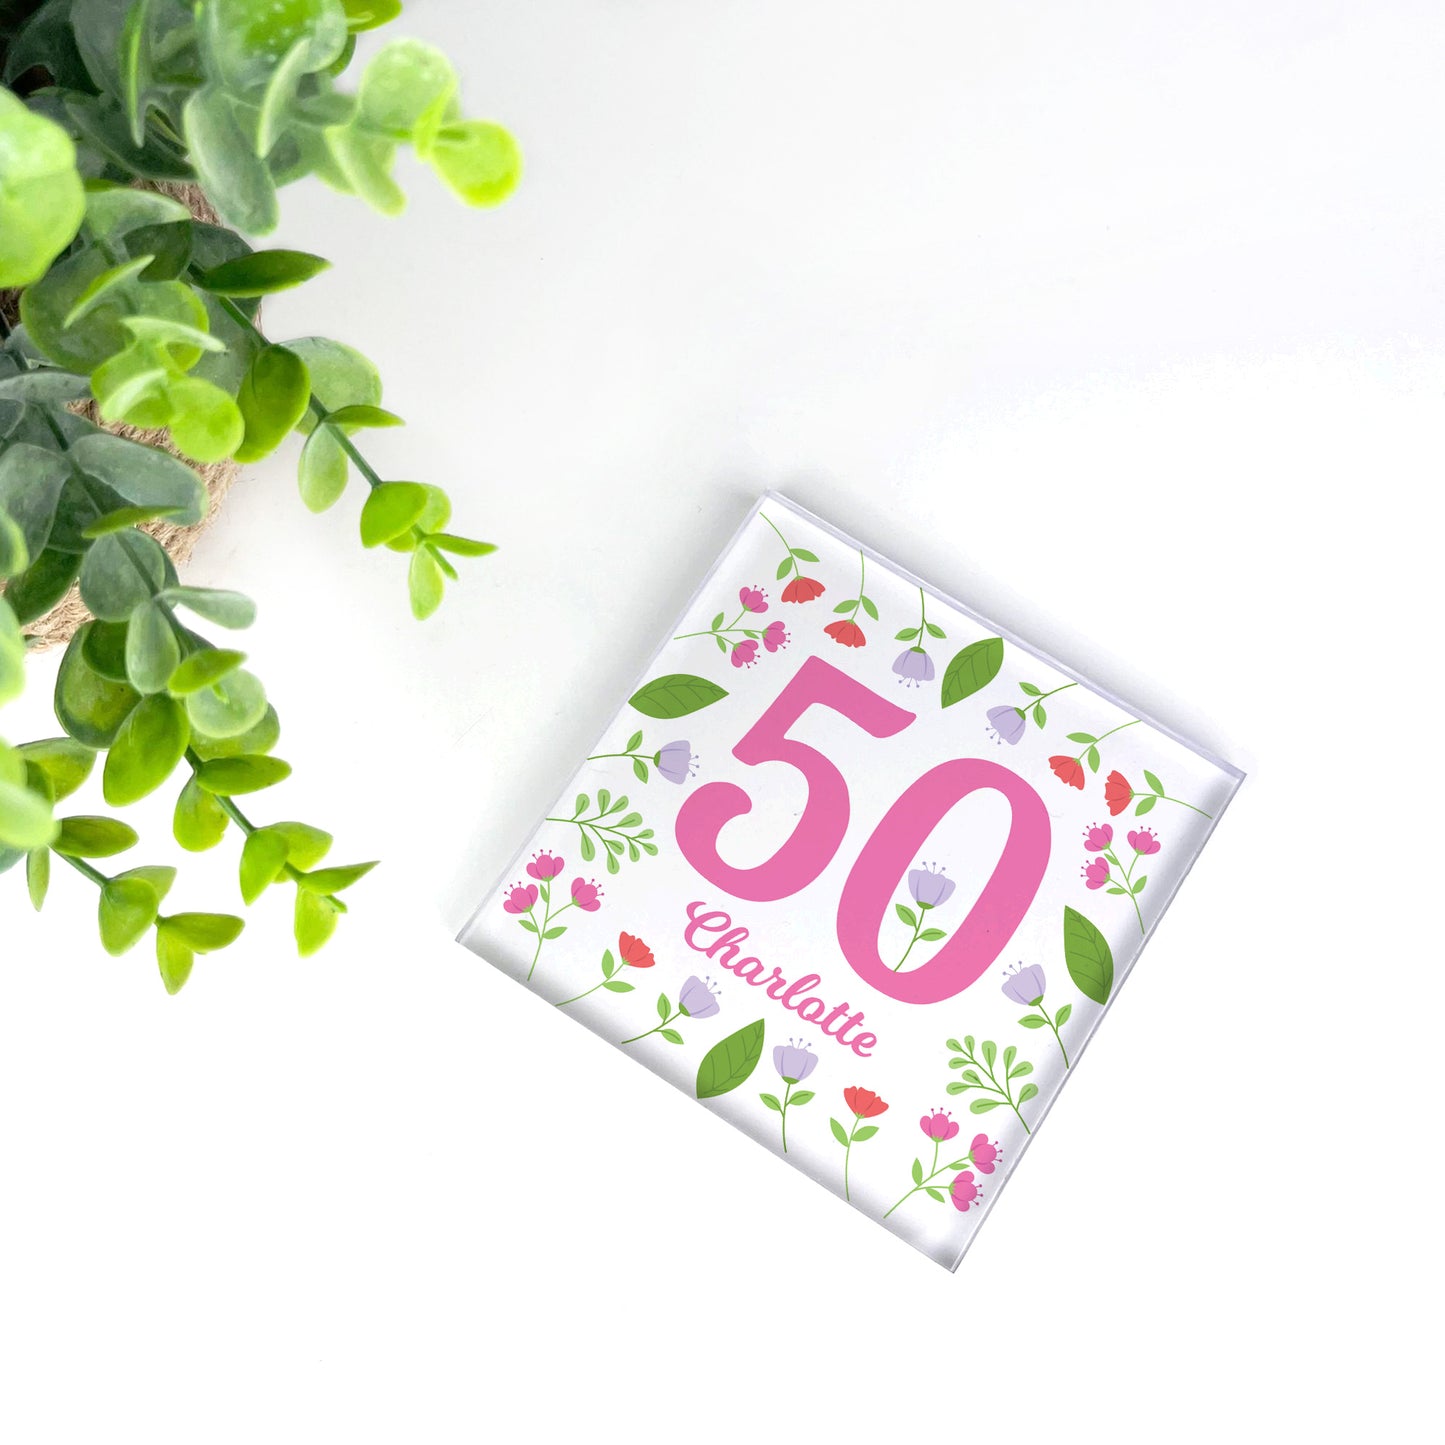 50th Birthday Gifts For Nan Mum Women Auntie Her PERSONALISED